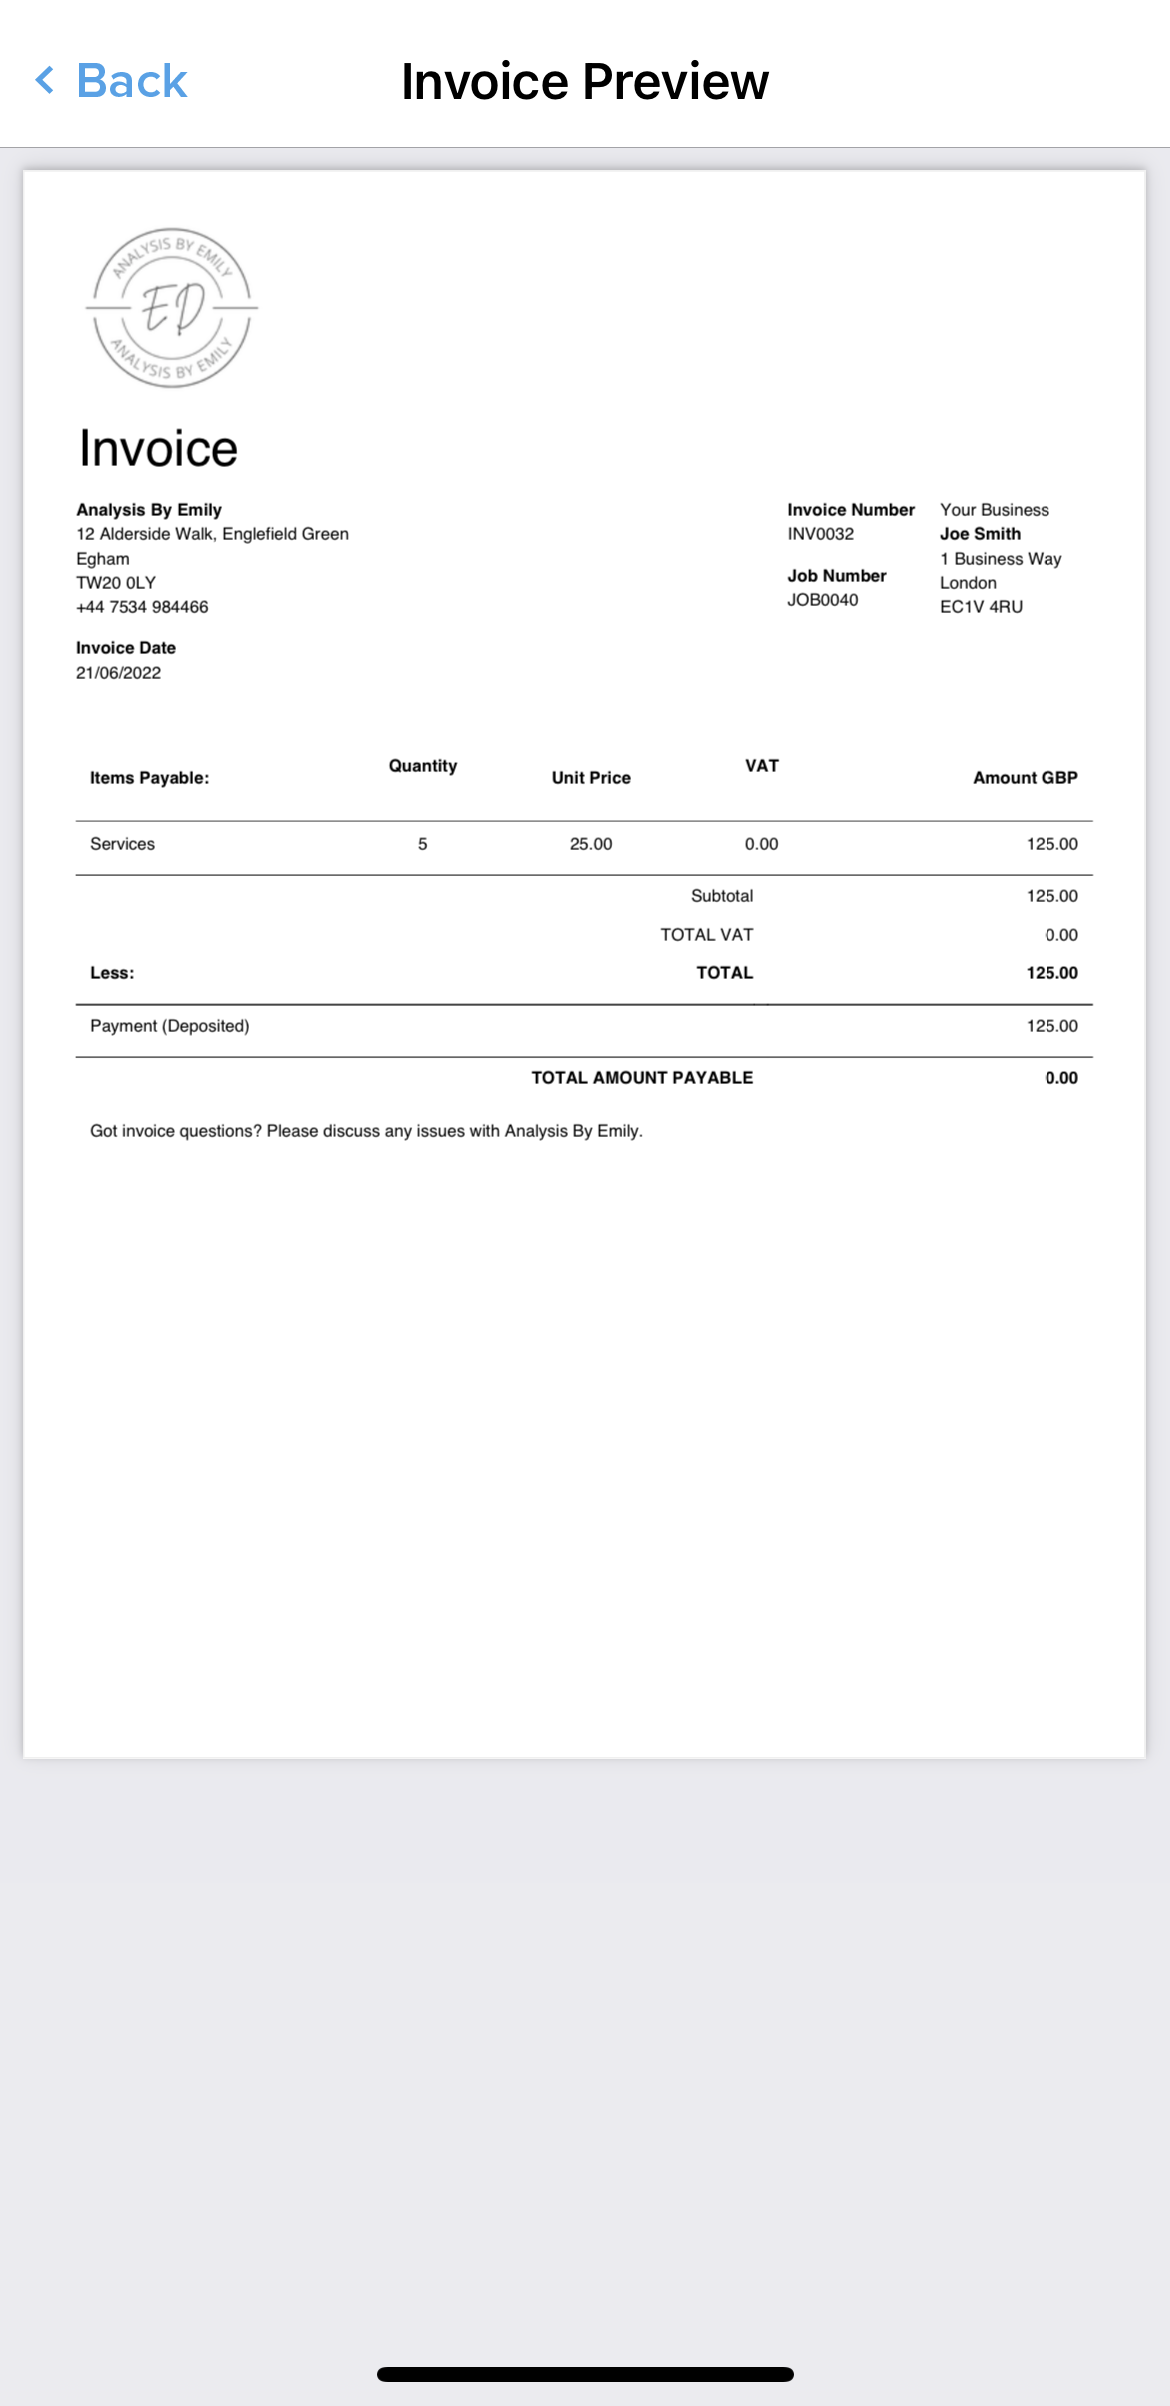 Send detailed, customised invoices to your customers in a few clicks.